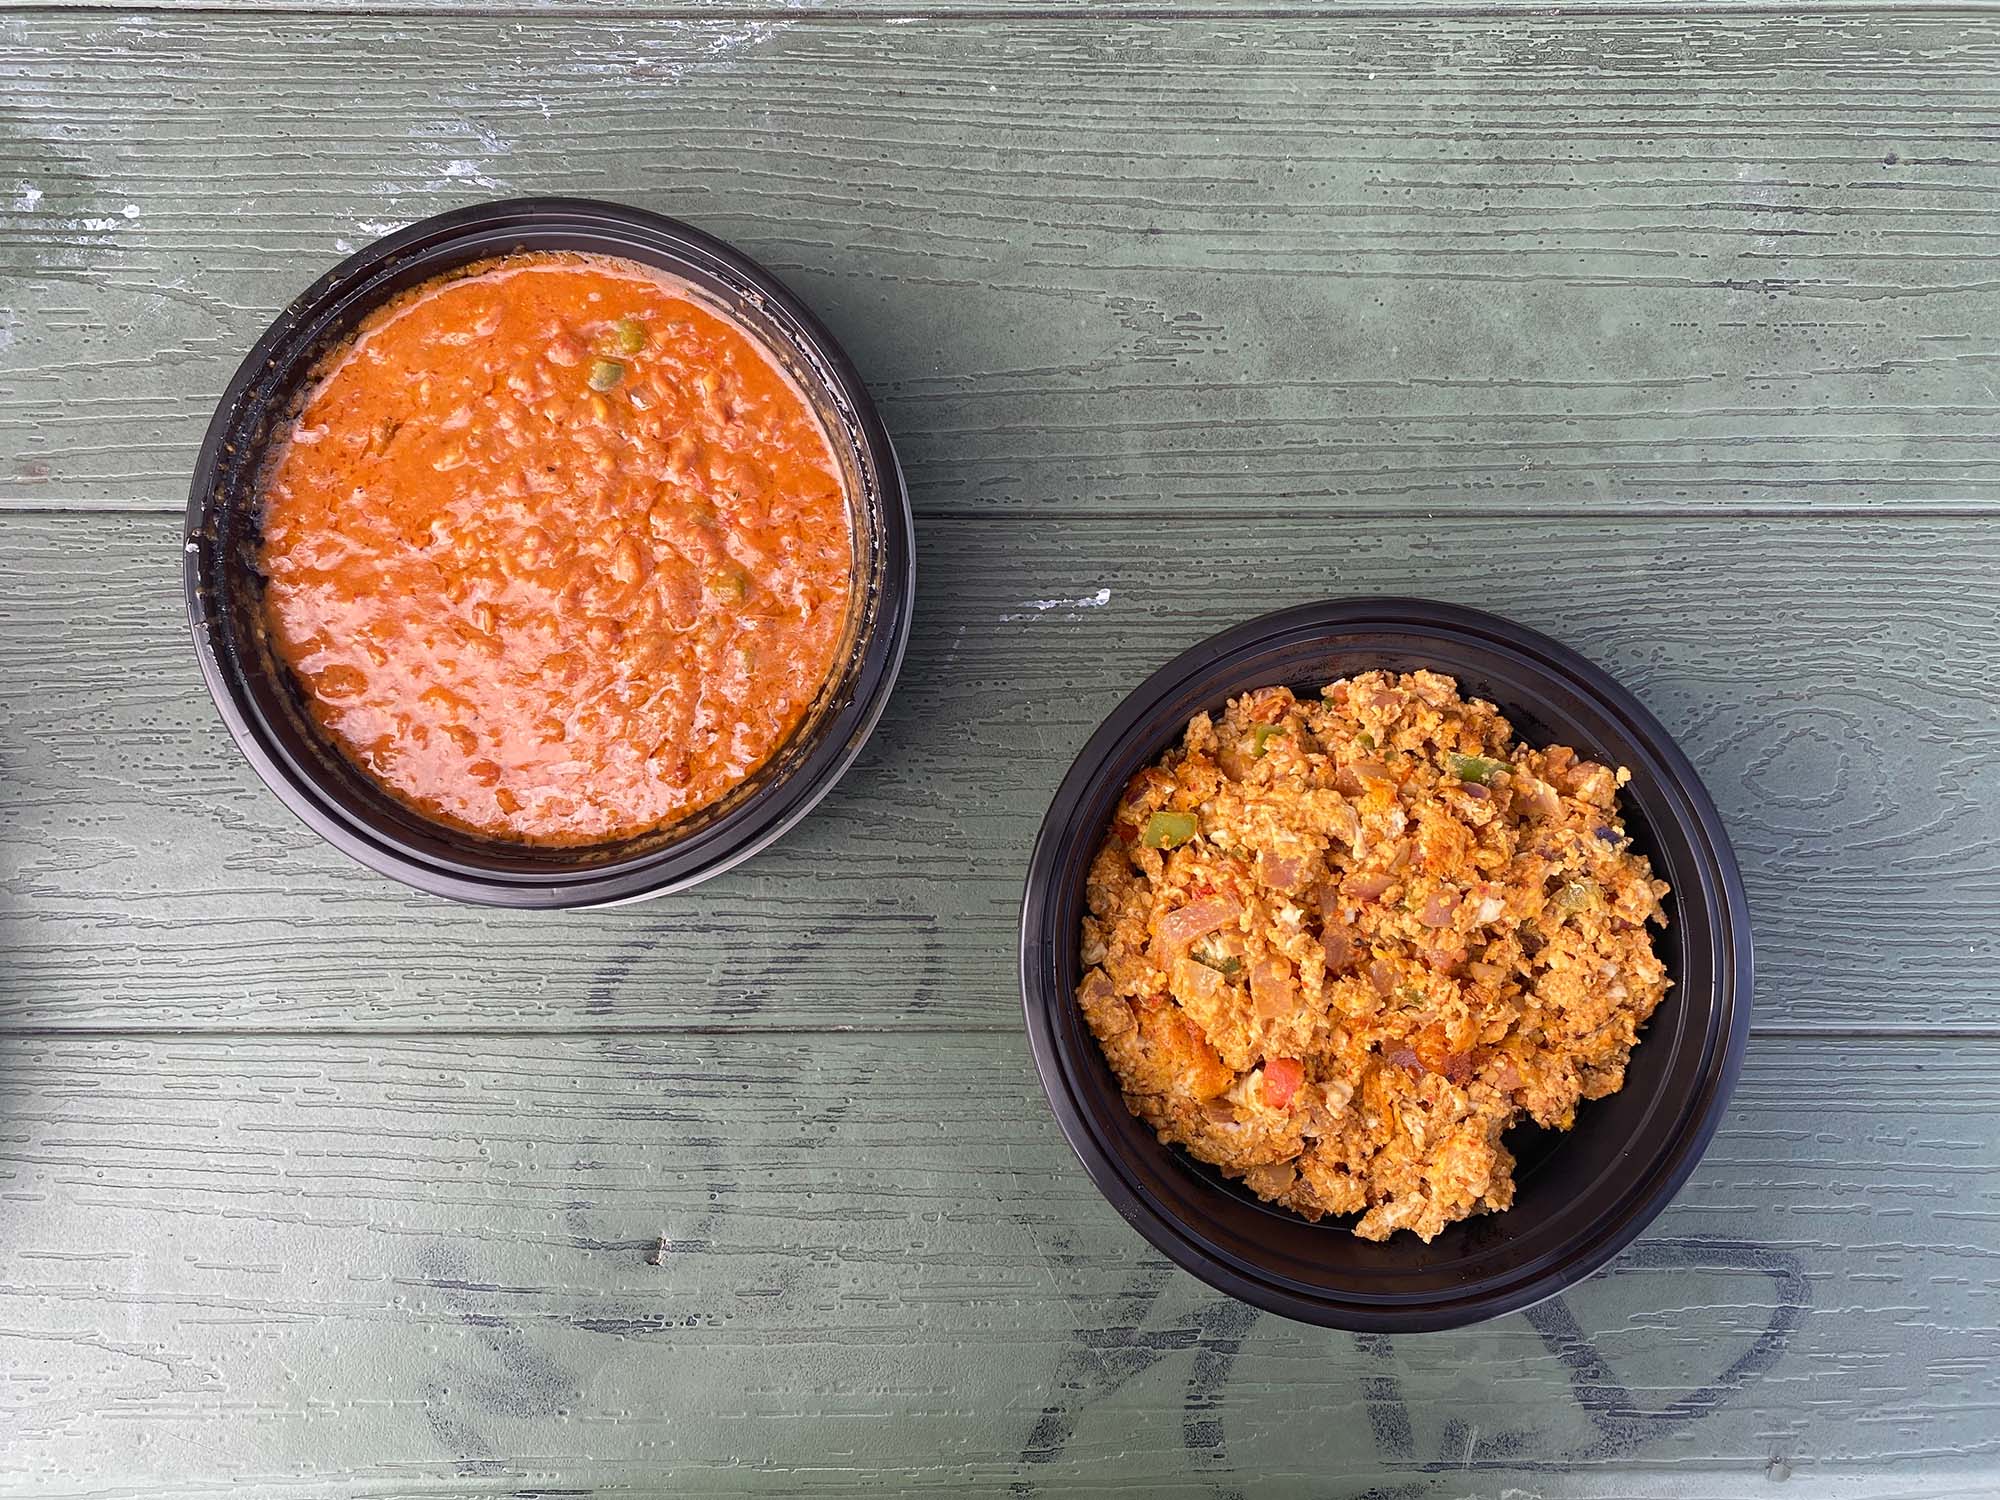 Two round plastic takeout containers on a picnic table. To the left is foul, a soupy, orange-hued bean stew. To the right is the shakshouka eggs, a kind of chunky vegetable scramble.